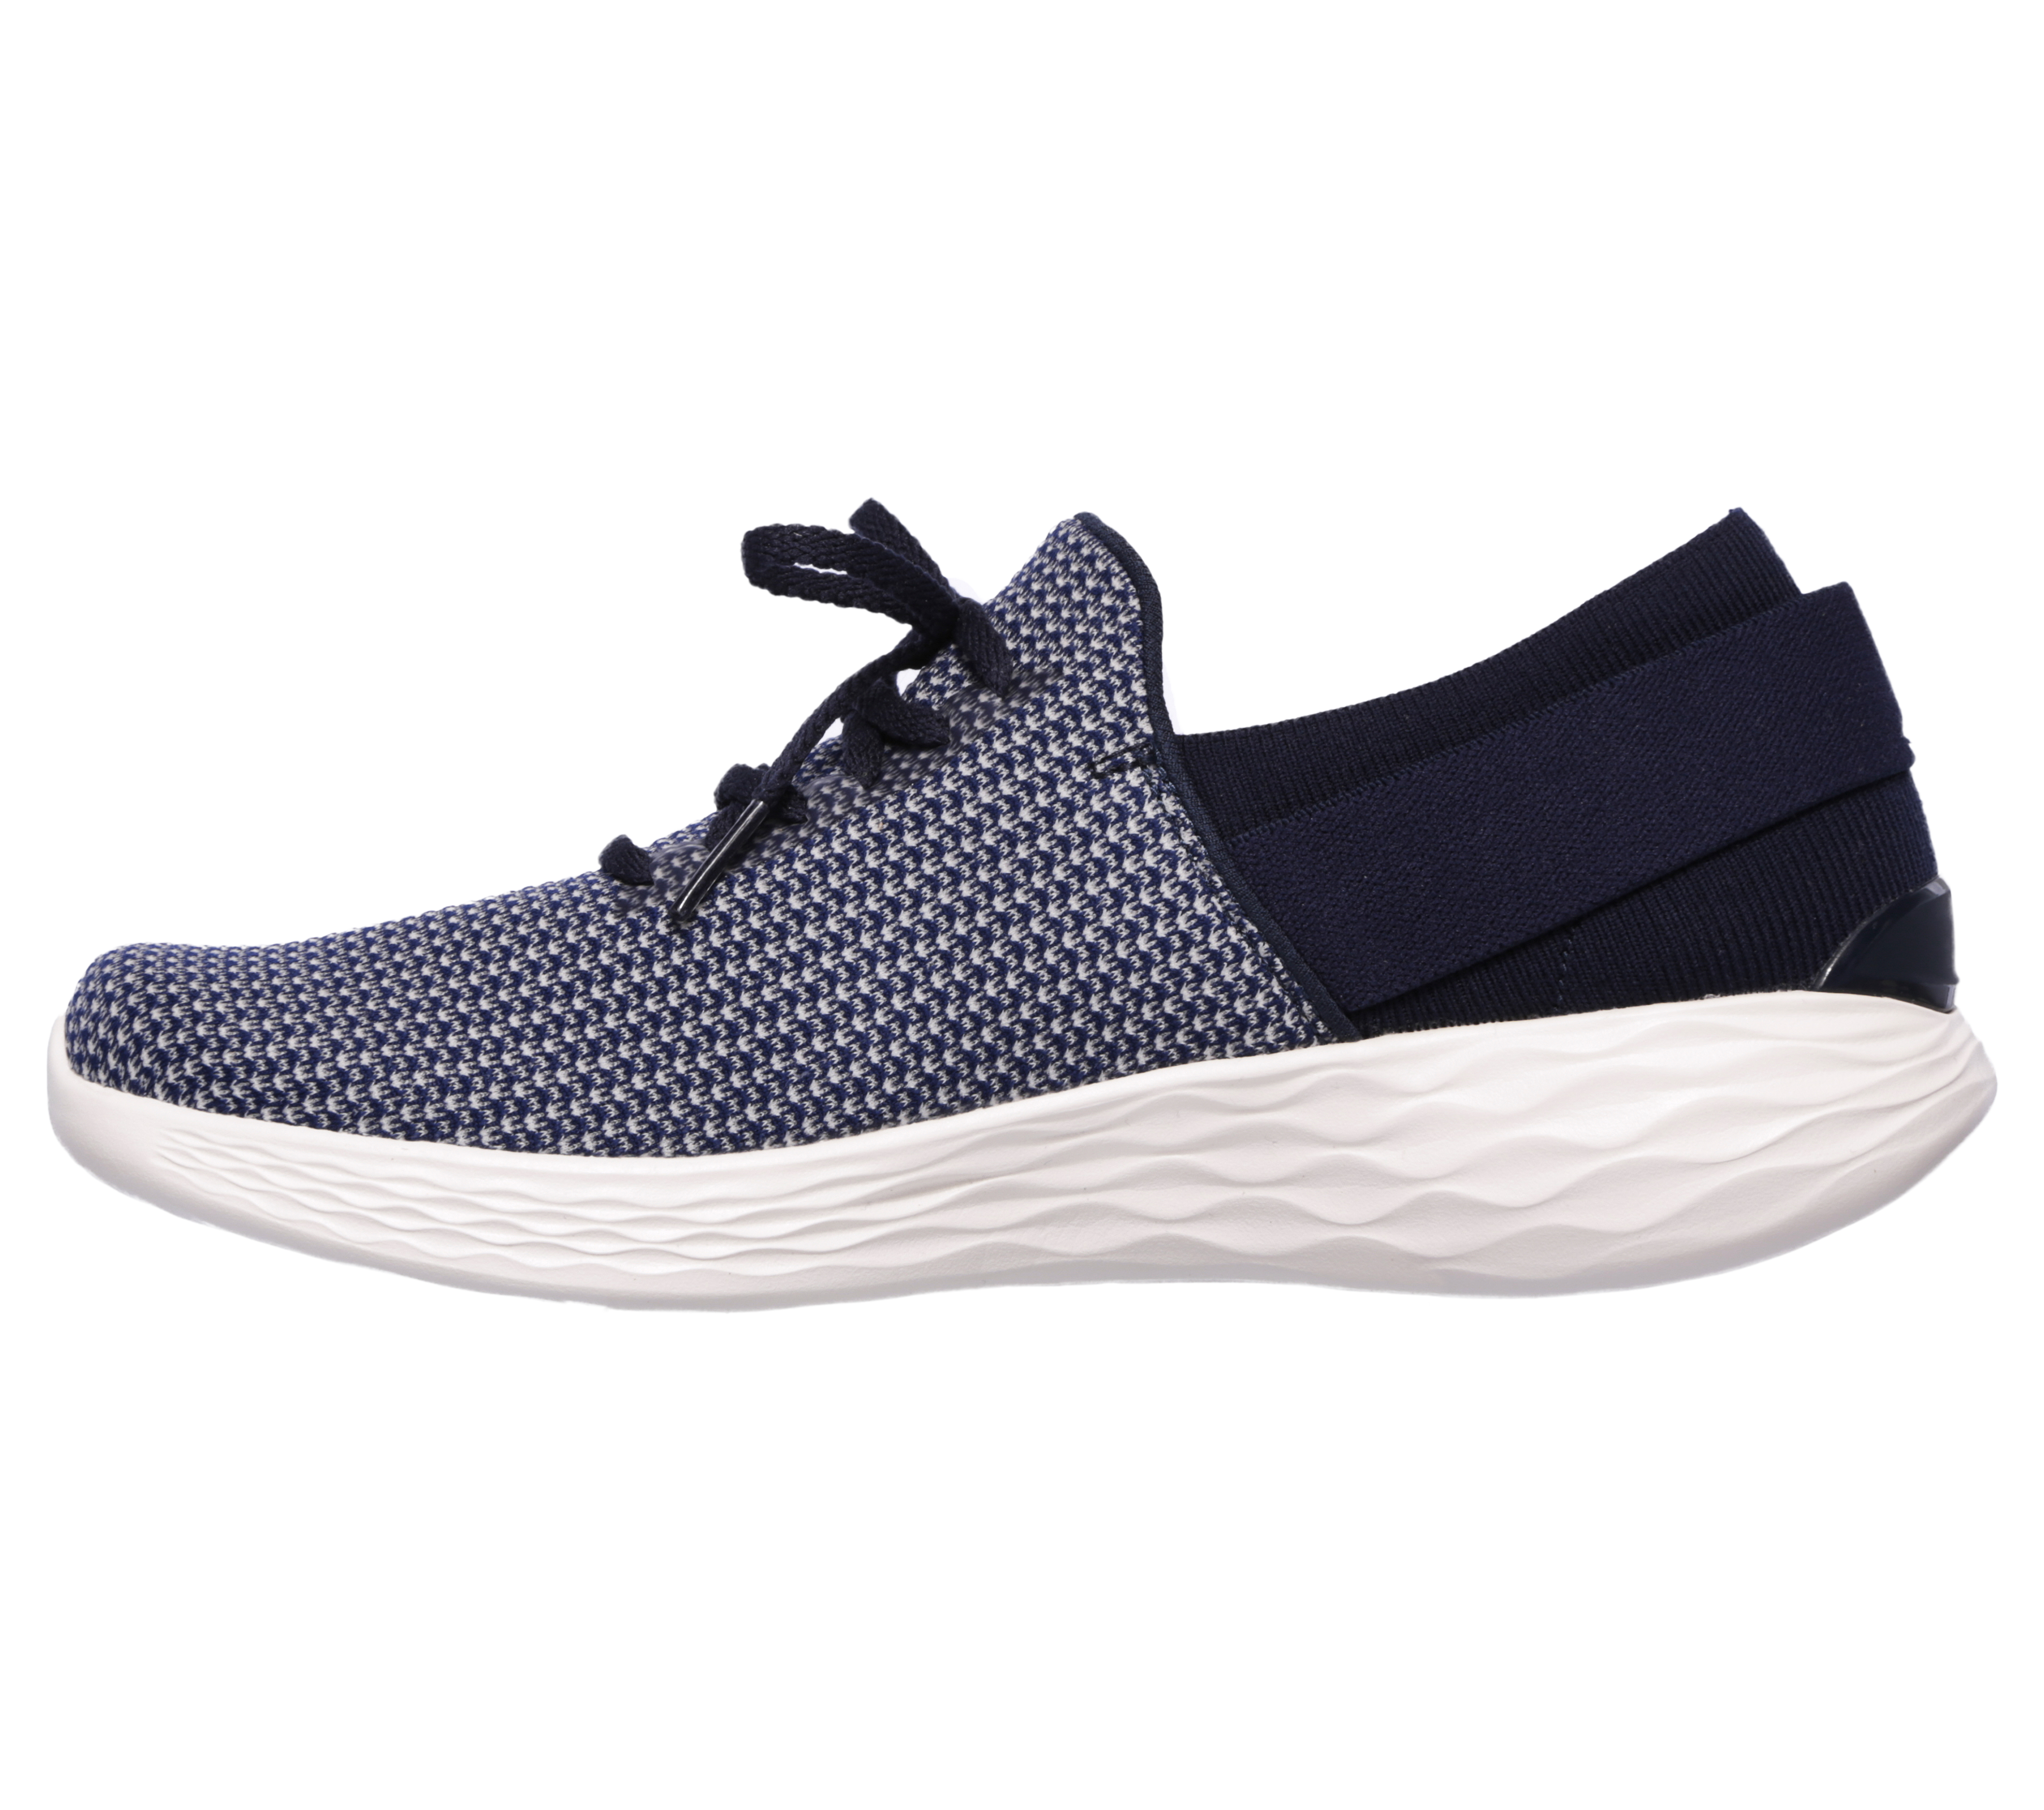 Giày nữ Skechers 14965-PERFORMANCE-NVW